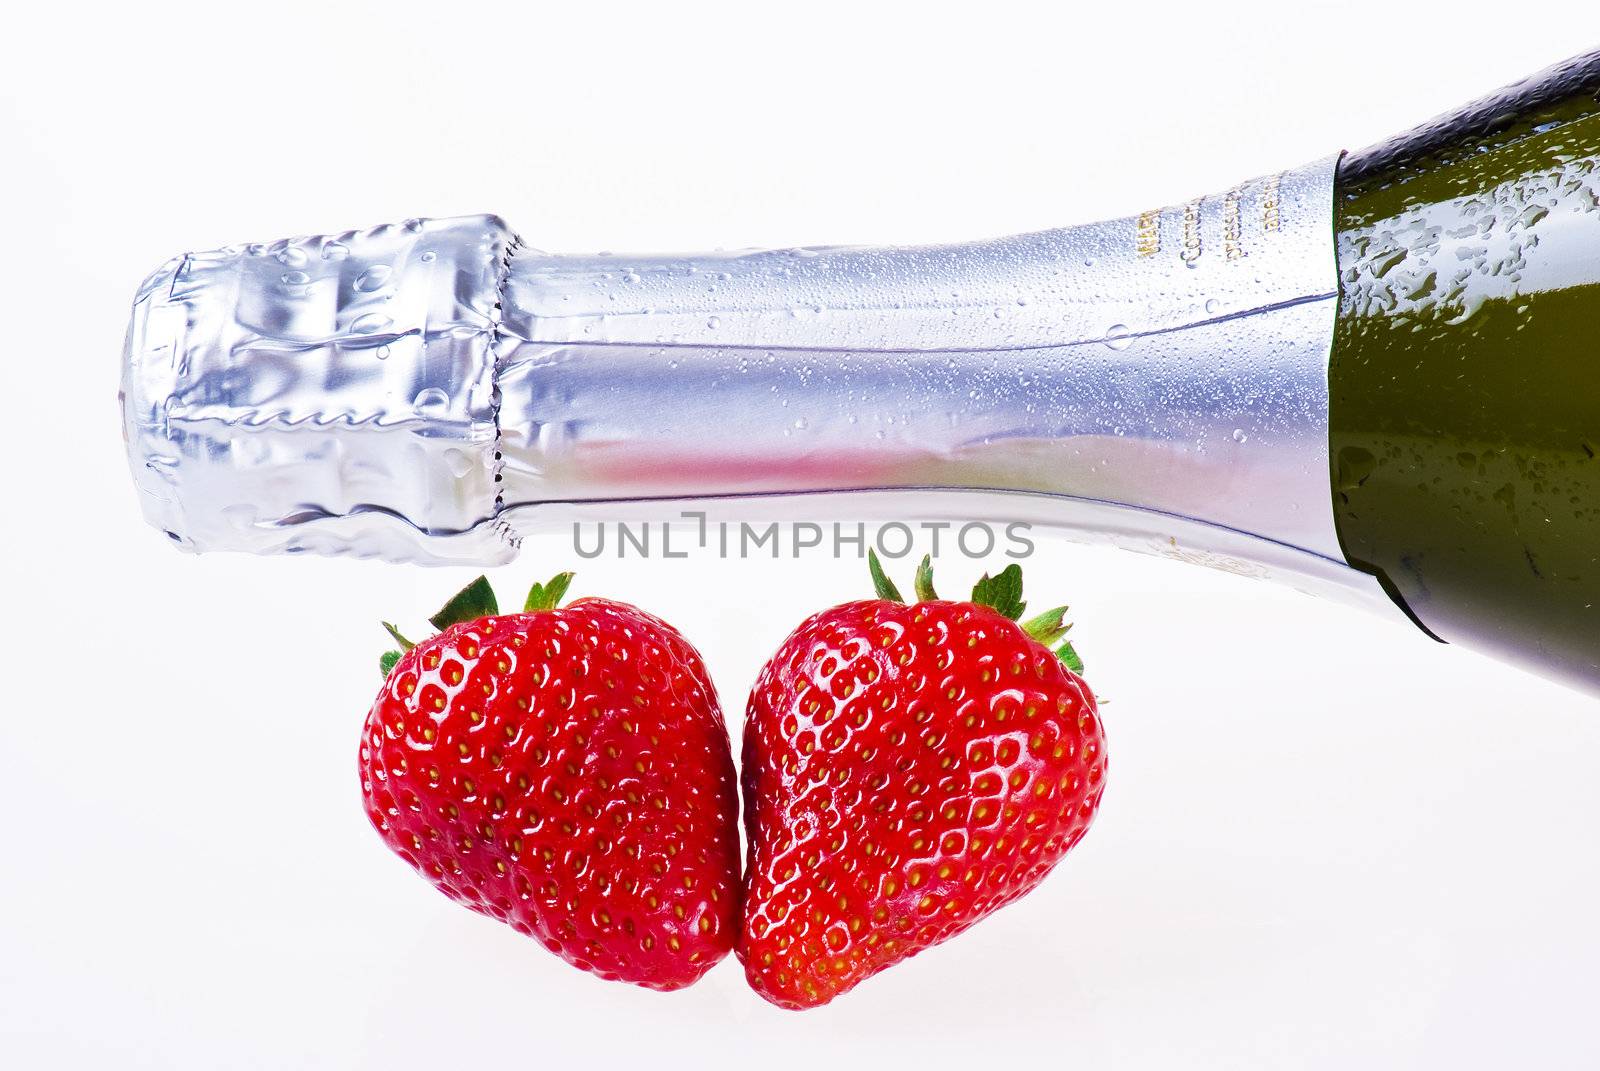 Champagne and strawberries by caldix